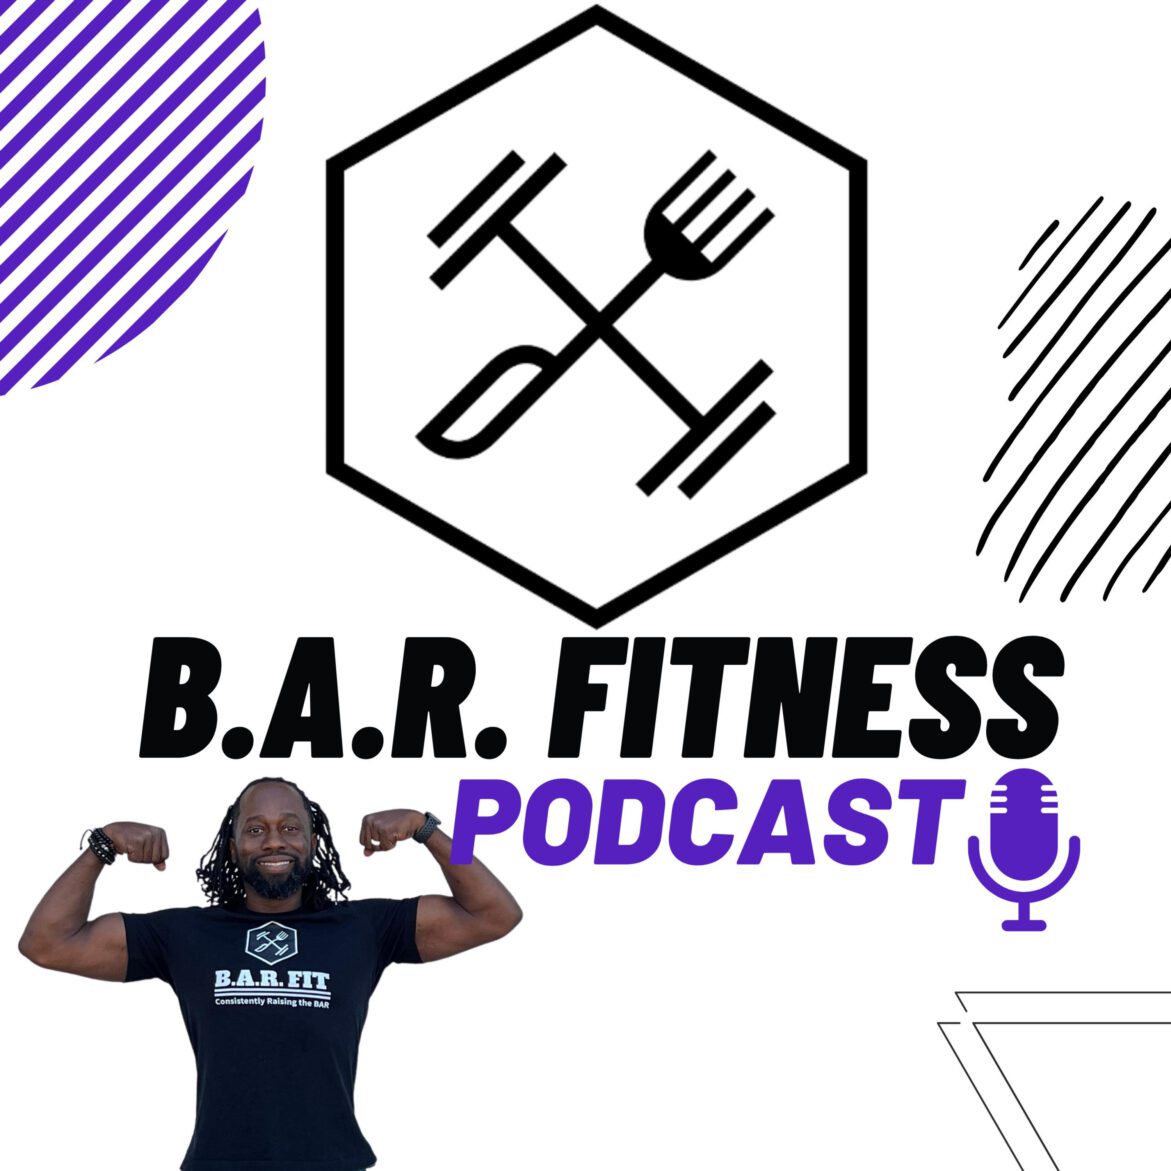 Black Podcasting - B.A.R. Fitness Podcast - Fun day Friday